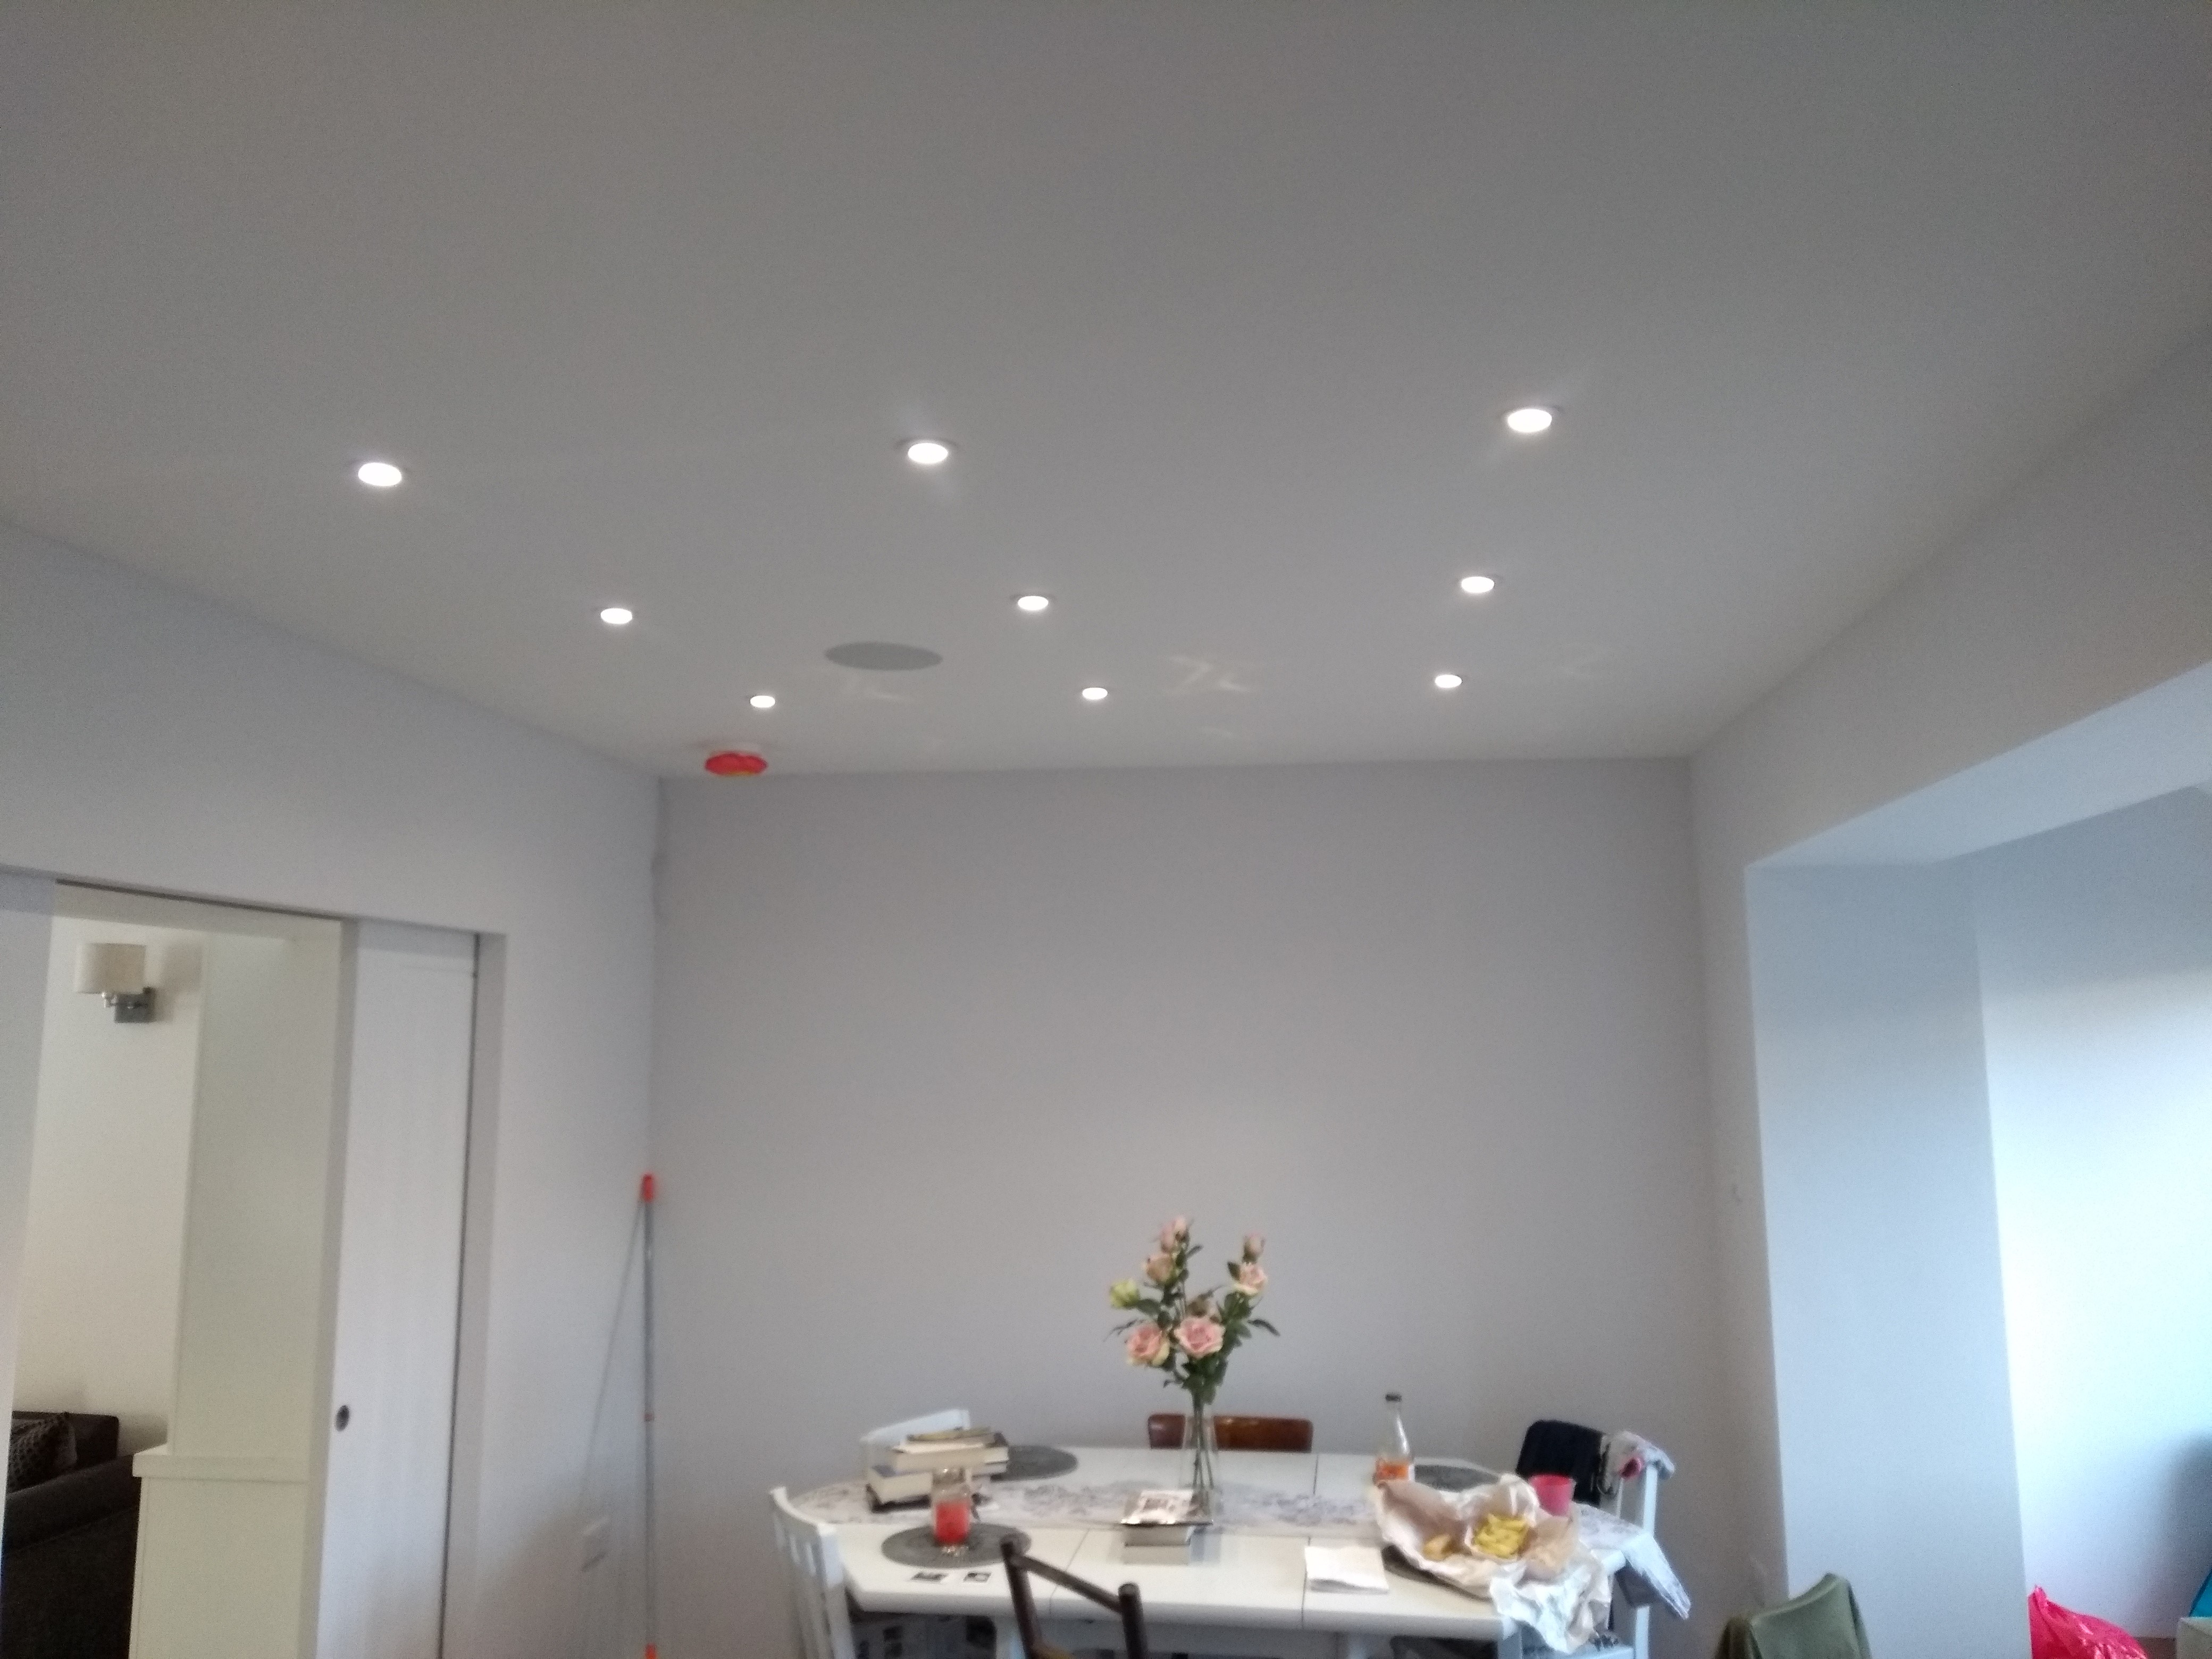 inset ceiling lights